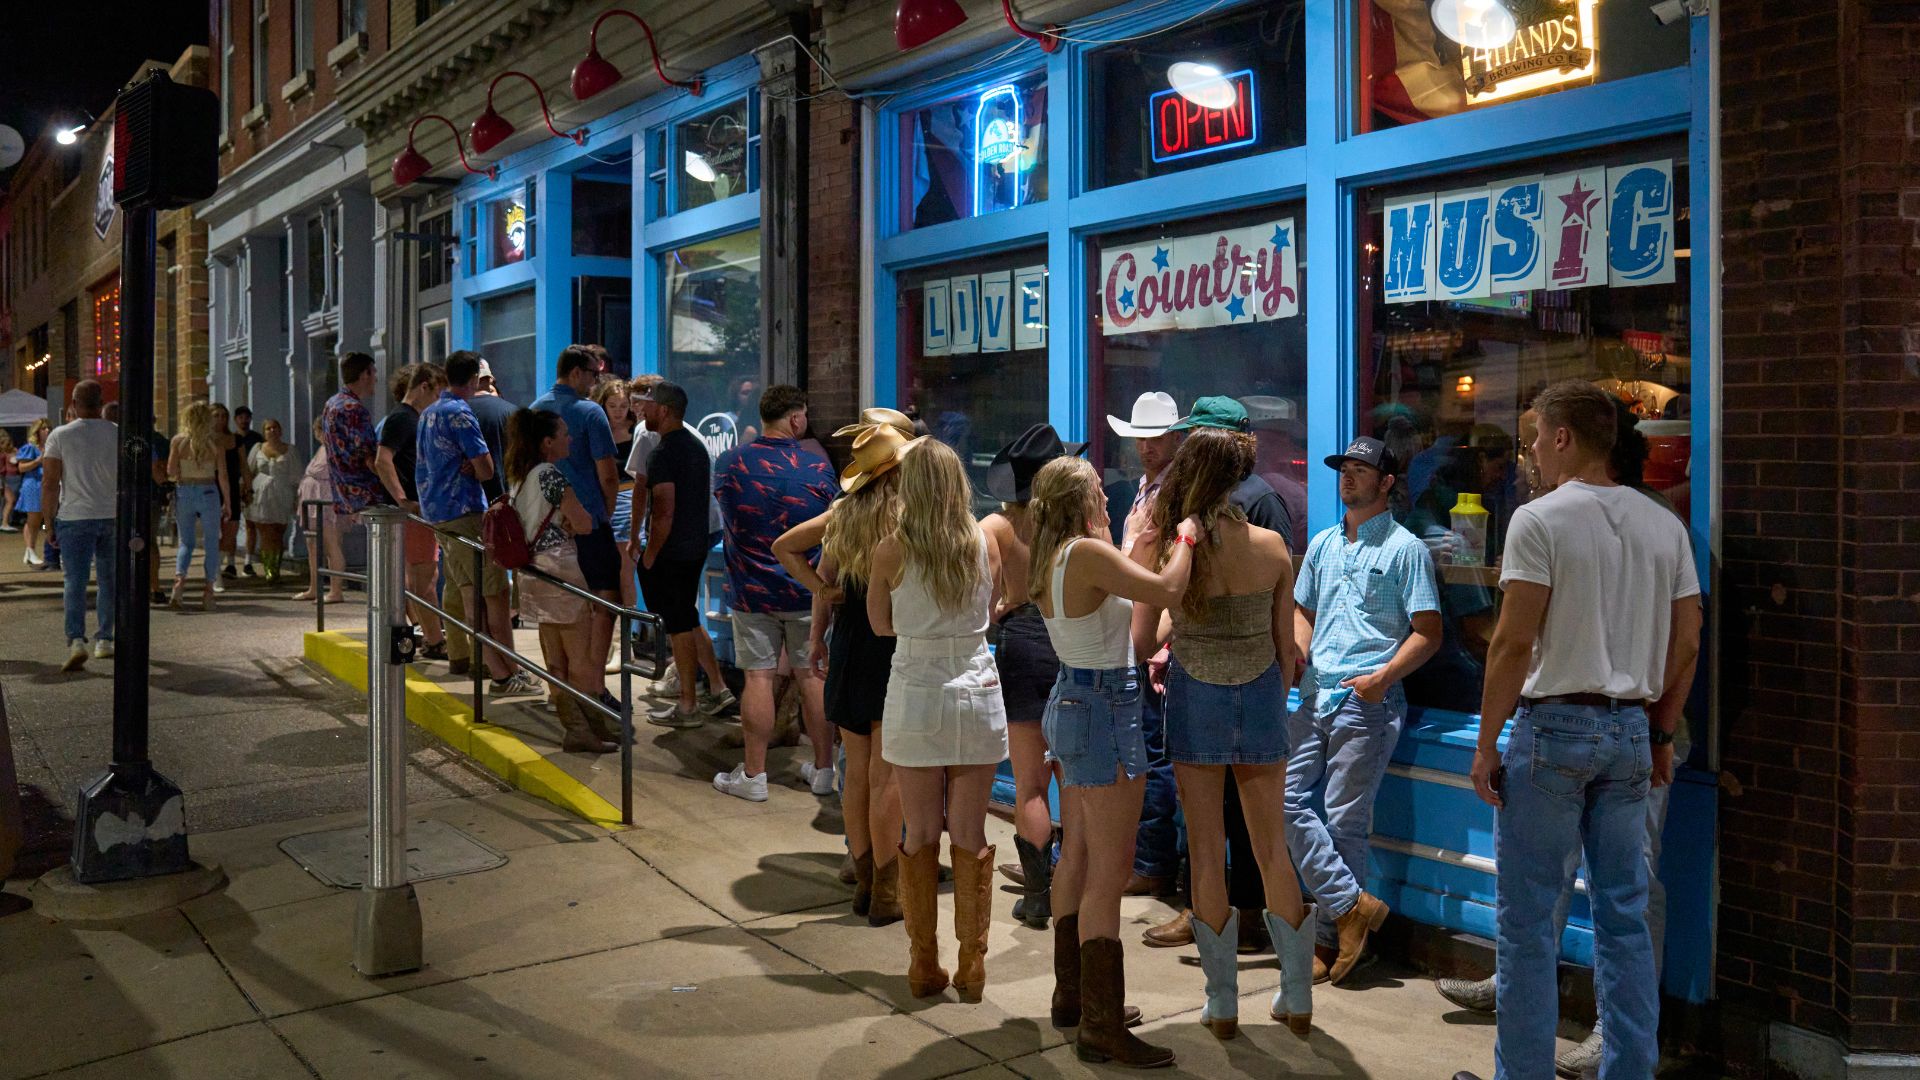 People line up to enter The Honky Tonk in downtown St. Louis.